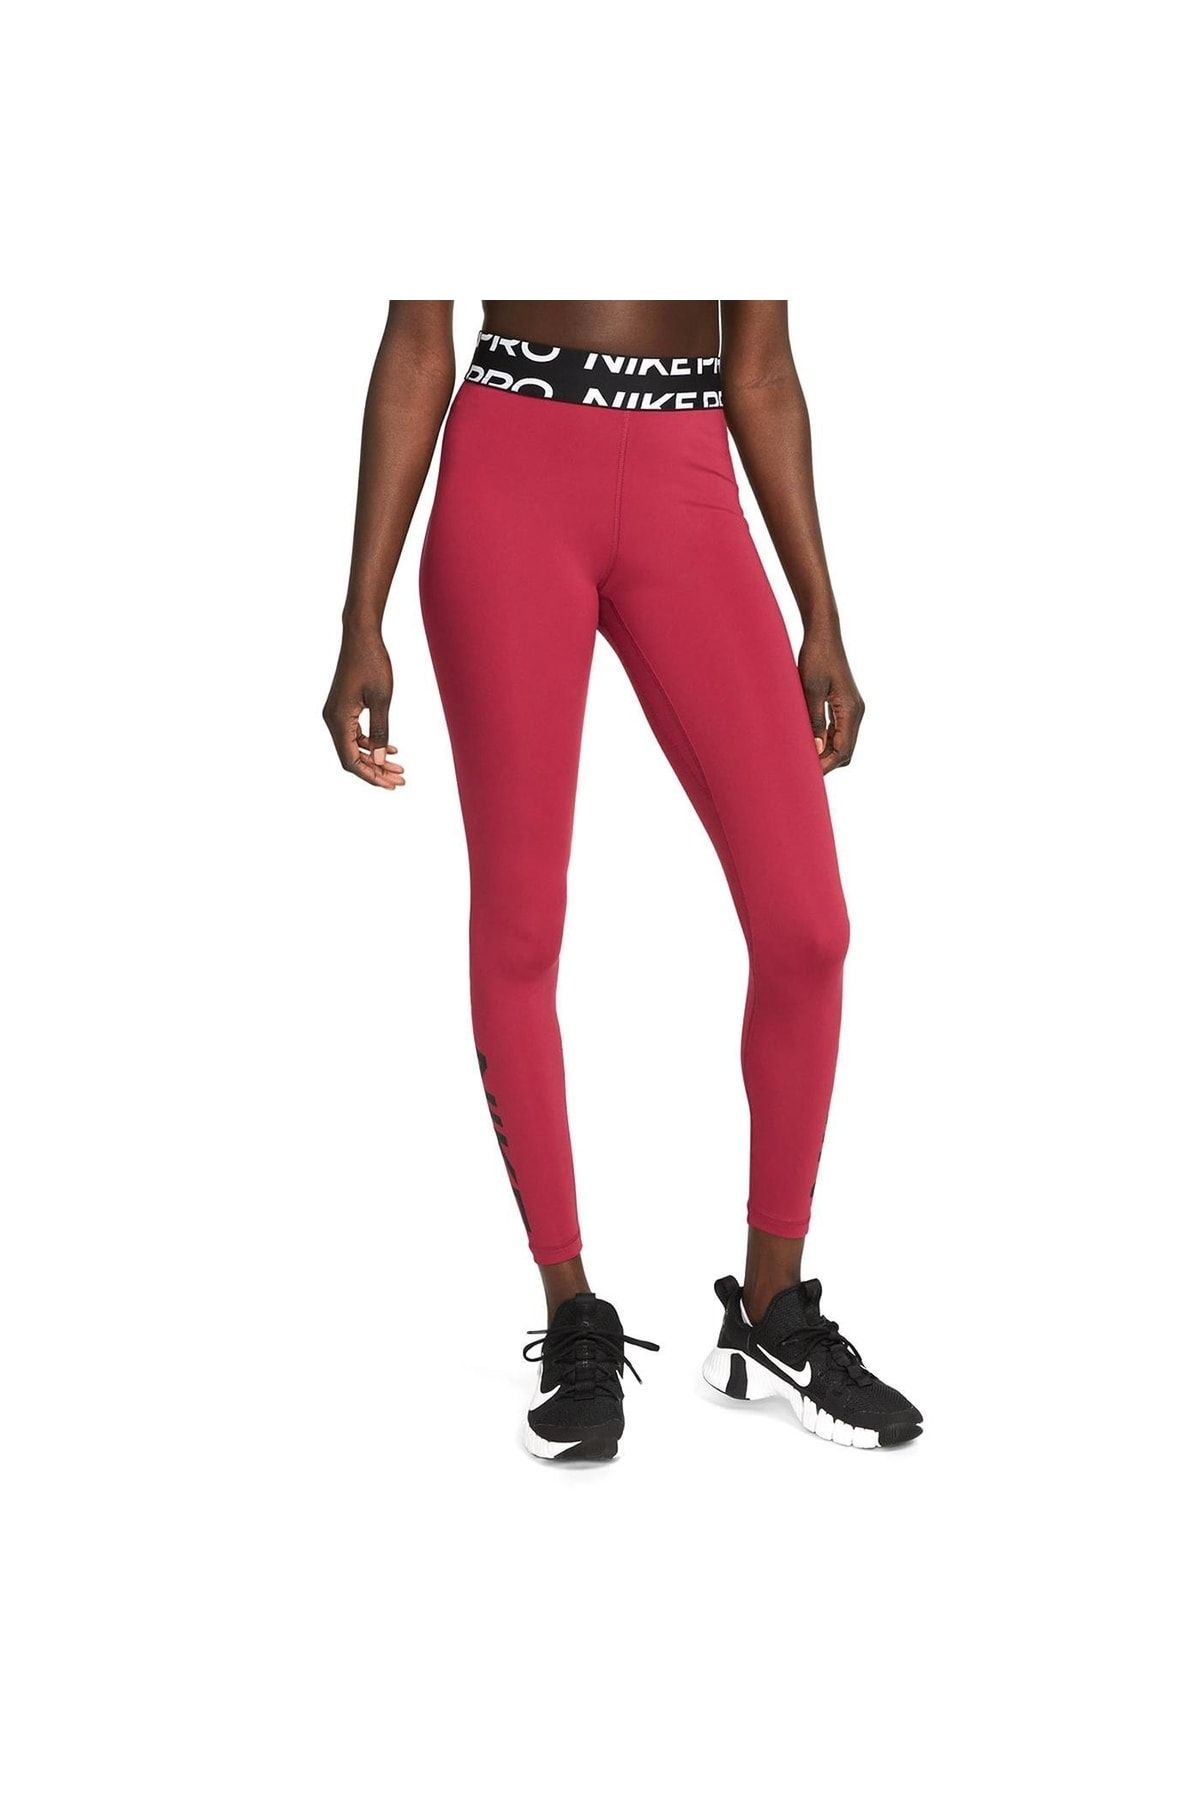 Nike Pro W Np Dri-fit Grx Tgt Nfs Women's Red Casual Style Tights Dr7741-693